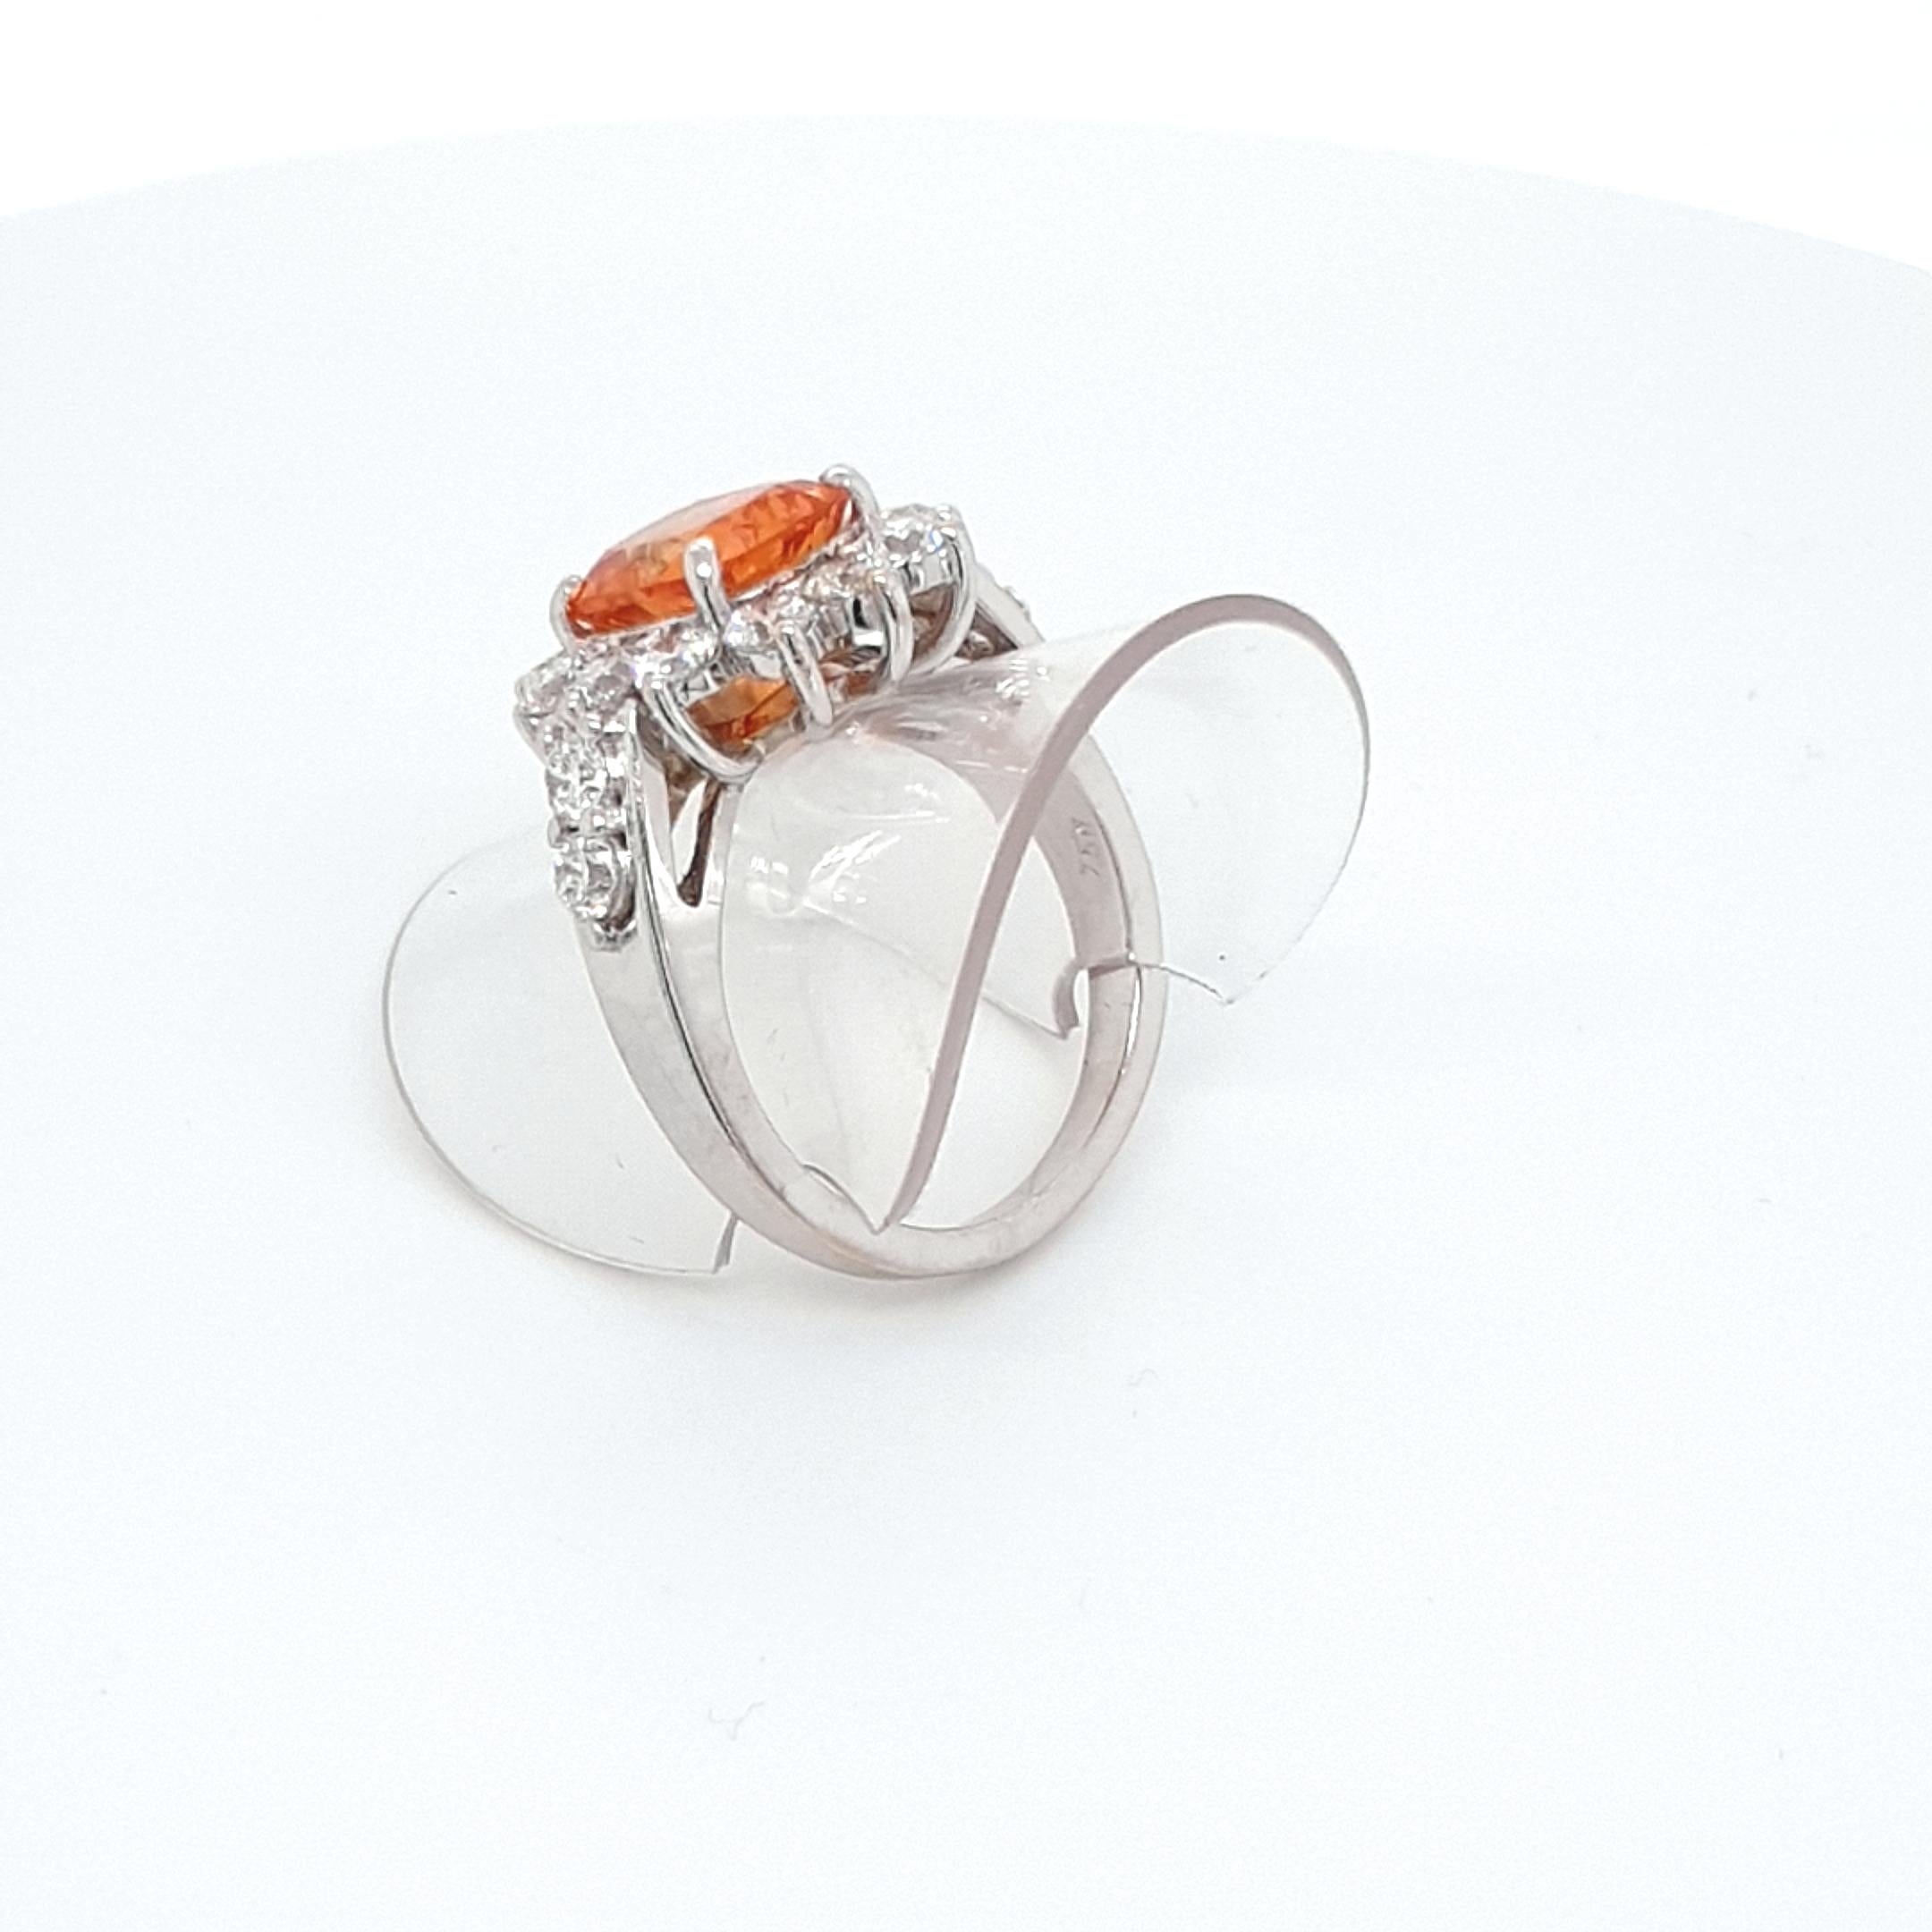 Faceted Orange Mandarine Garnet Ring with 18 Carat White Gold and Diamonds In Excellent Condition For Sale In Kirschweiler, DE